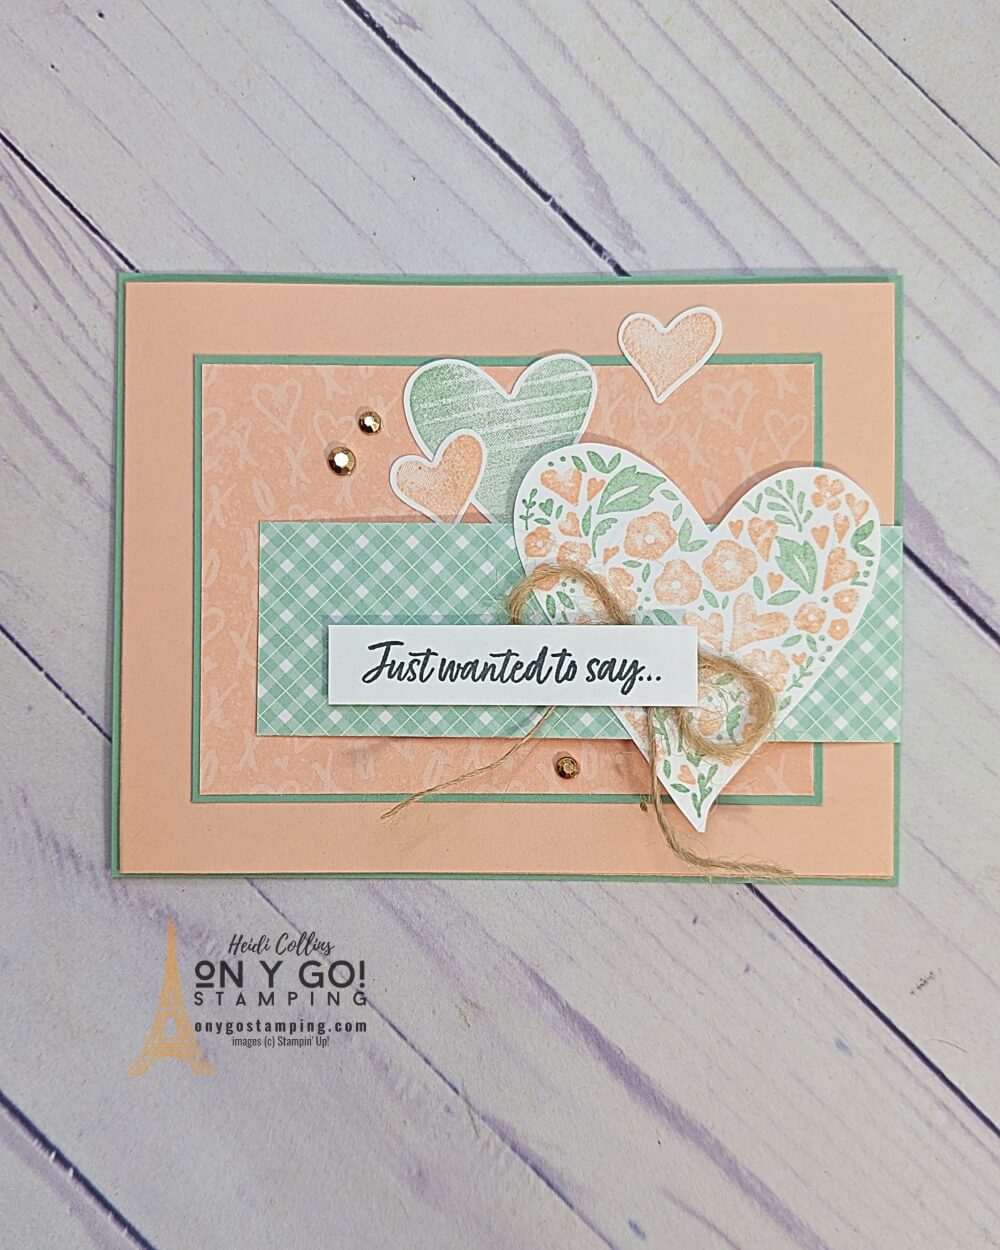 This Valentine's Day, make a special impression that goes beyond the usual card with the beautiful Country Bouquet stamp set from Stampin' Up!. With the Country Gingham and Country Floral Lane patterned paper, you can make a stunning fun fold card that will surely make your recipient feel extra special and loved.